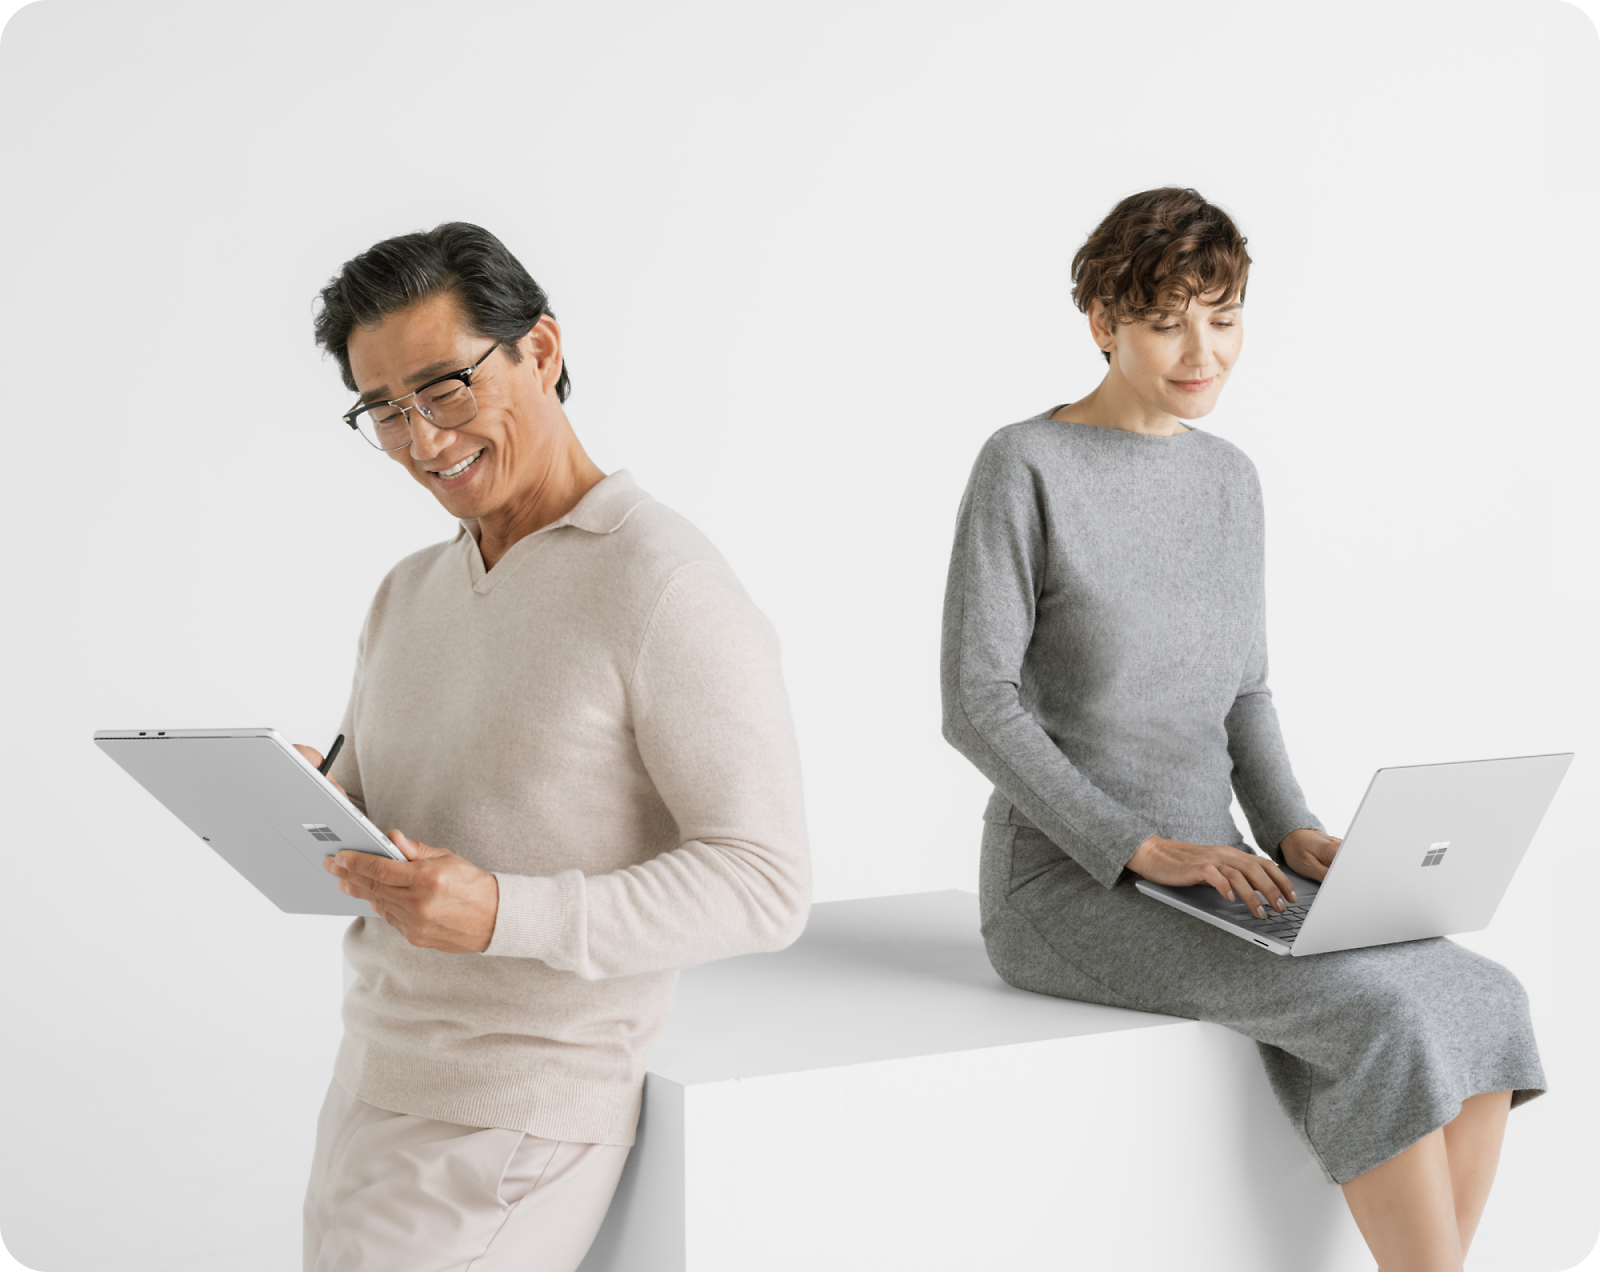 Two adults work on their devices against a white background. One stands with a tablet and stylus